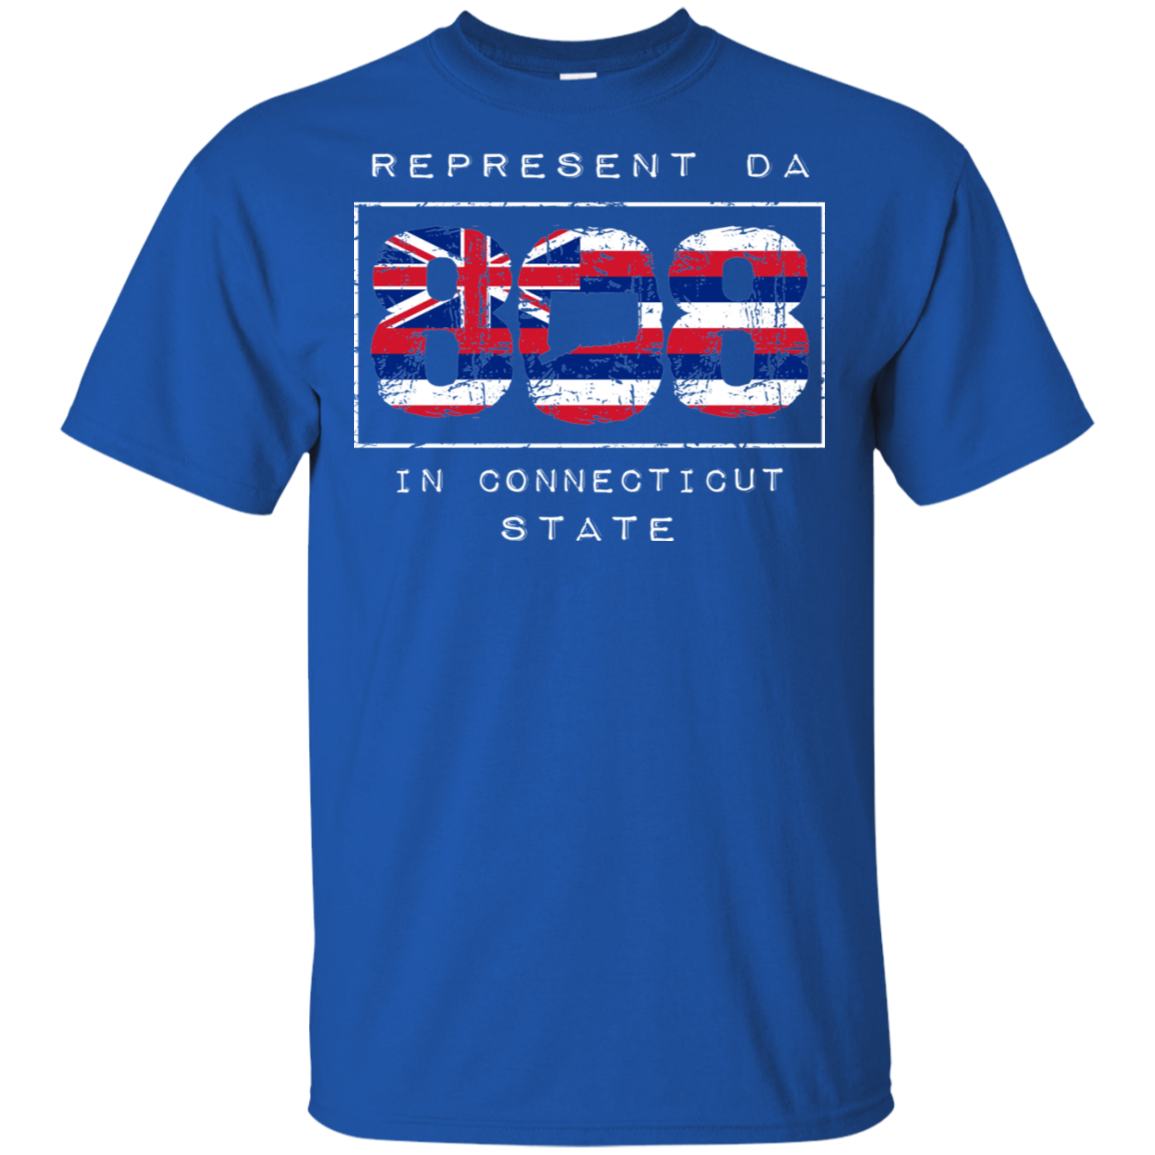 Rep Da 808 In Connecticut State Ultra Cotton T-Shirt, T-Shirts, Hawaii Nei All Day